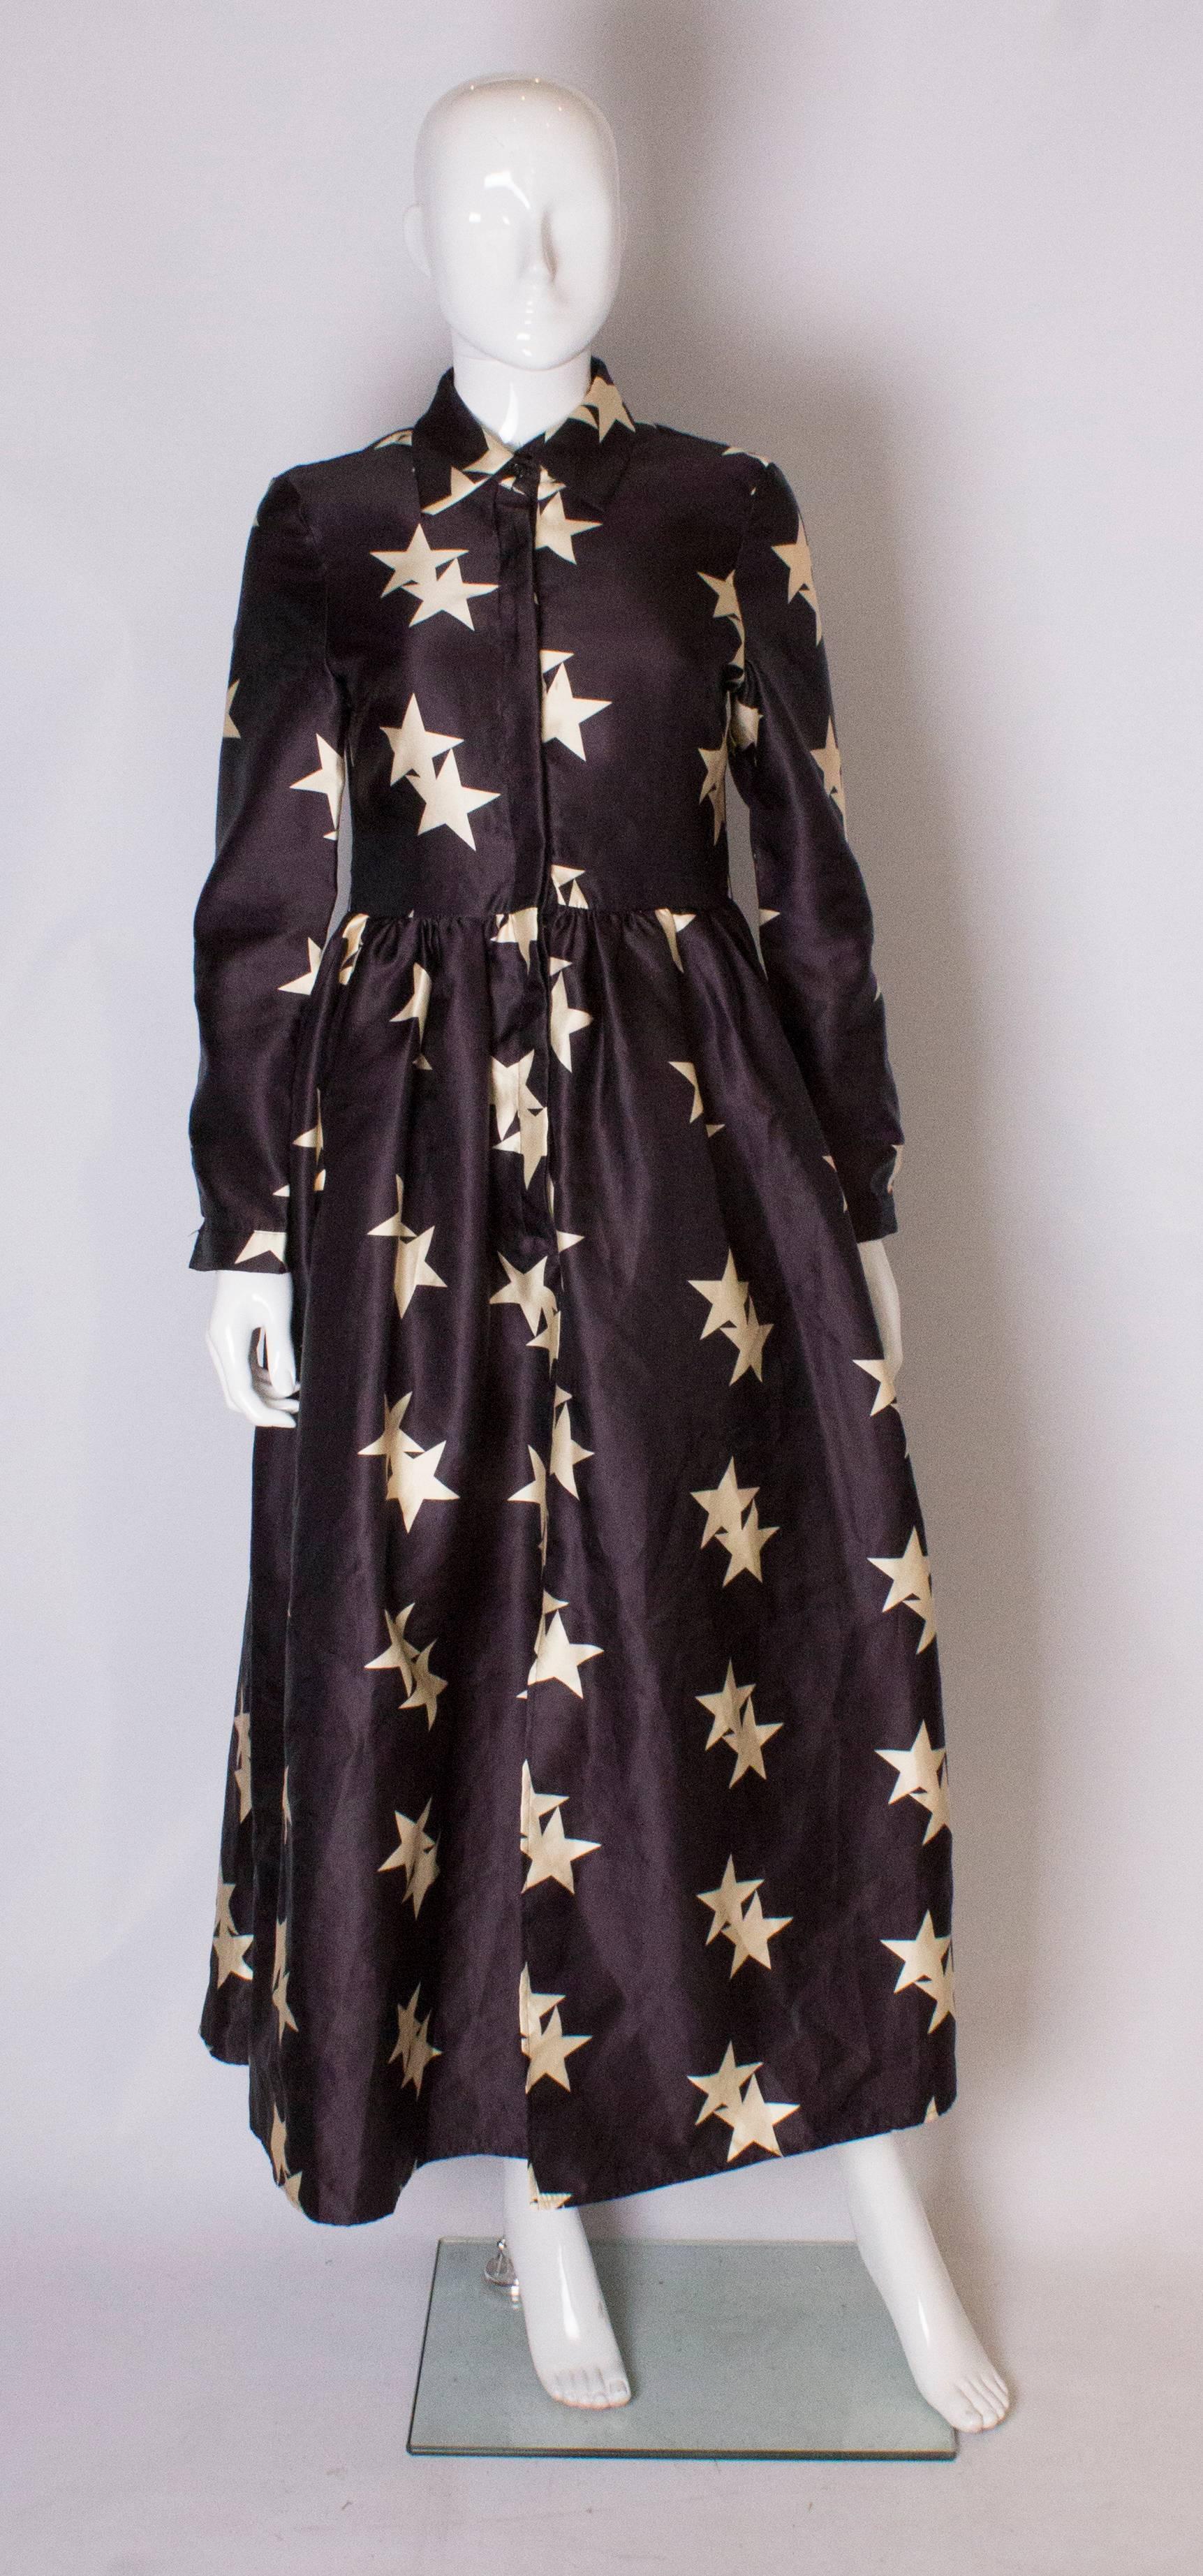 A chic and easy to wear shirt dress in a wonderful star print.
The dress is in a deep mauve/blue colour with a star print. It has gathering at the waist and a button through front.